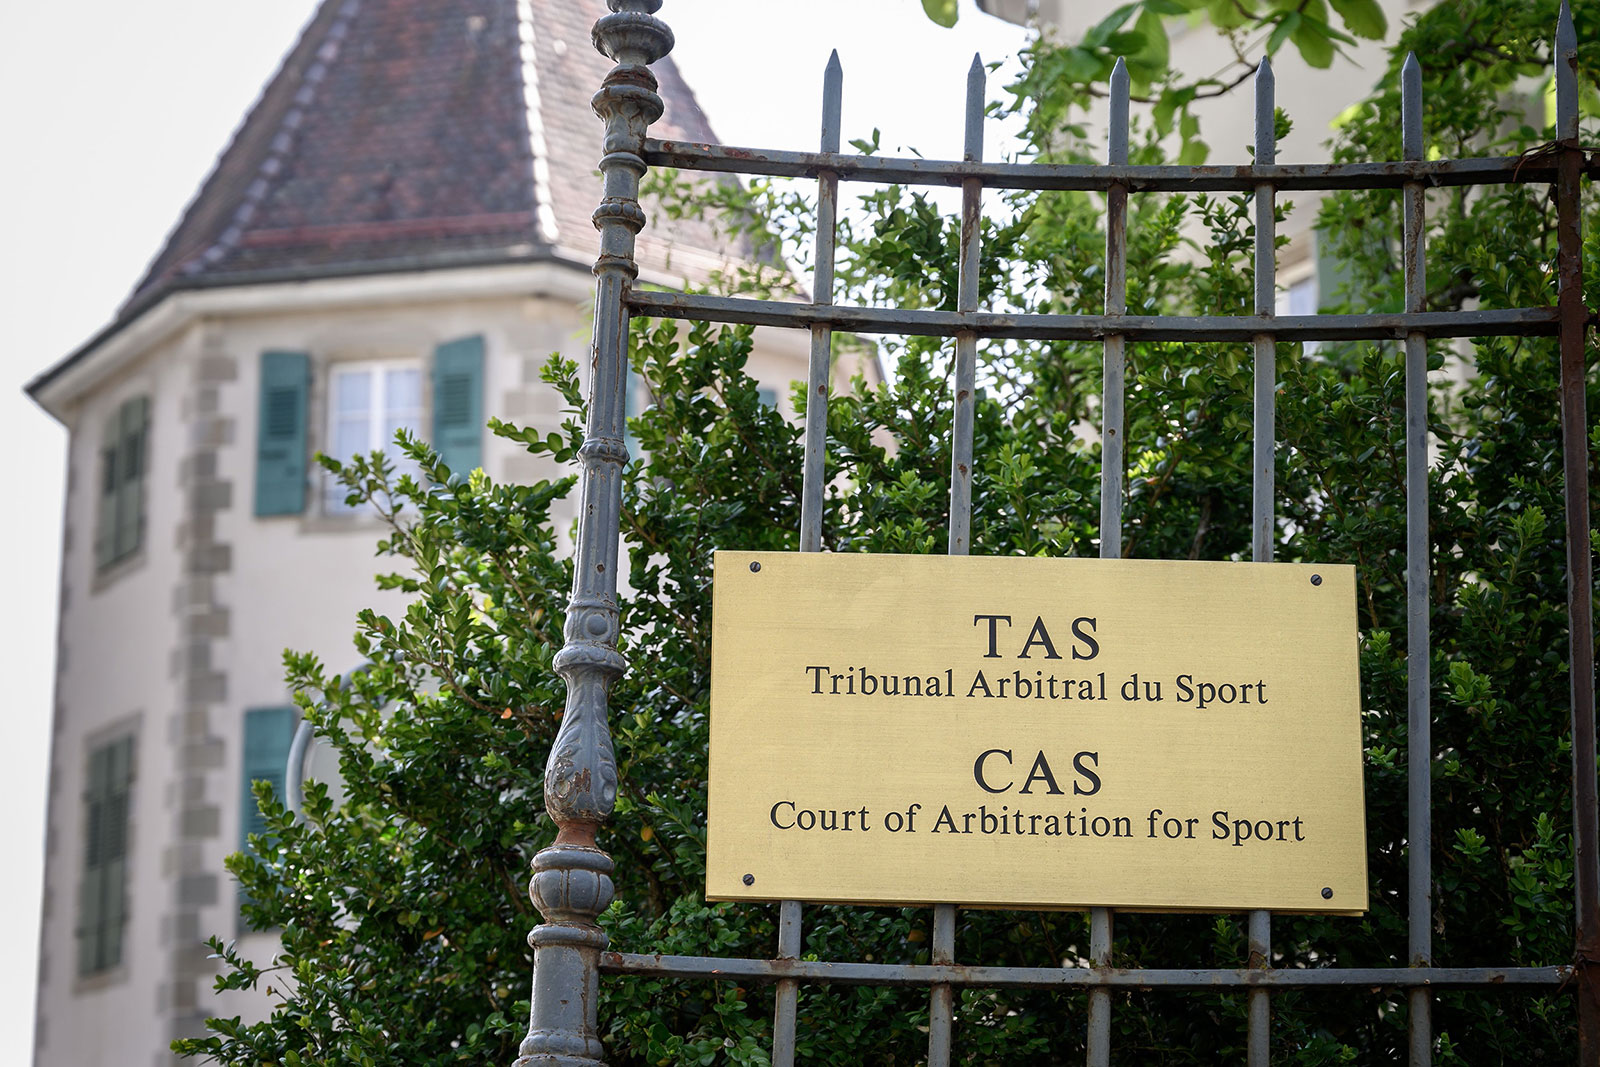 The Court of Arbitration for Sport (CAS) headquarters in Lausanne, Switzerland.